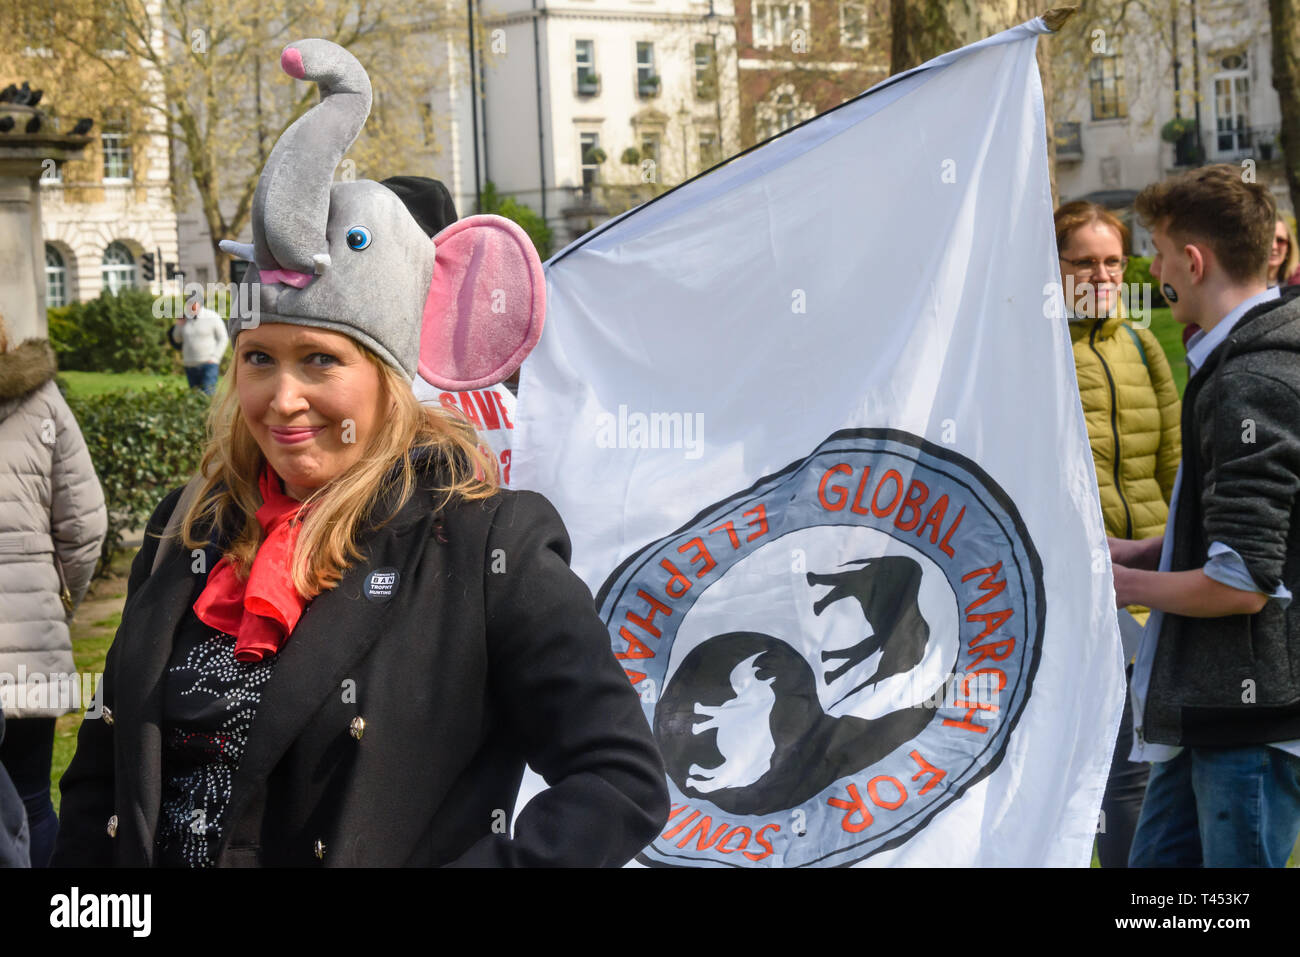 London, UK. 13th April 2014. People meet in Cavendish Square to march through London  to a rally opposite Downing St as a part of the 2019 Global March for Elephants and Rhinos. They called on the UK government to impose a ban on the import of hunting trophies of endangered species to the UK, and supported an increase in the protection under CITES for elephants and opposed attempts to downgrade protection of endangered species or reopen trade in ivory and other body parts. Peter Marshall/Alamy Live News Stock Photo